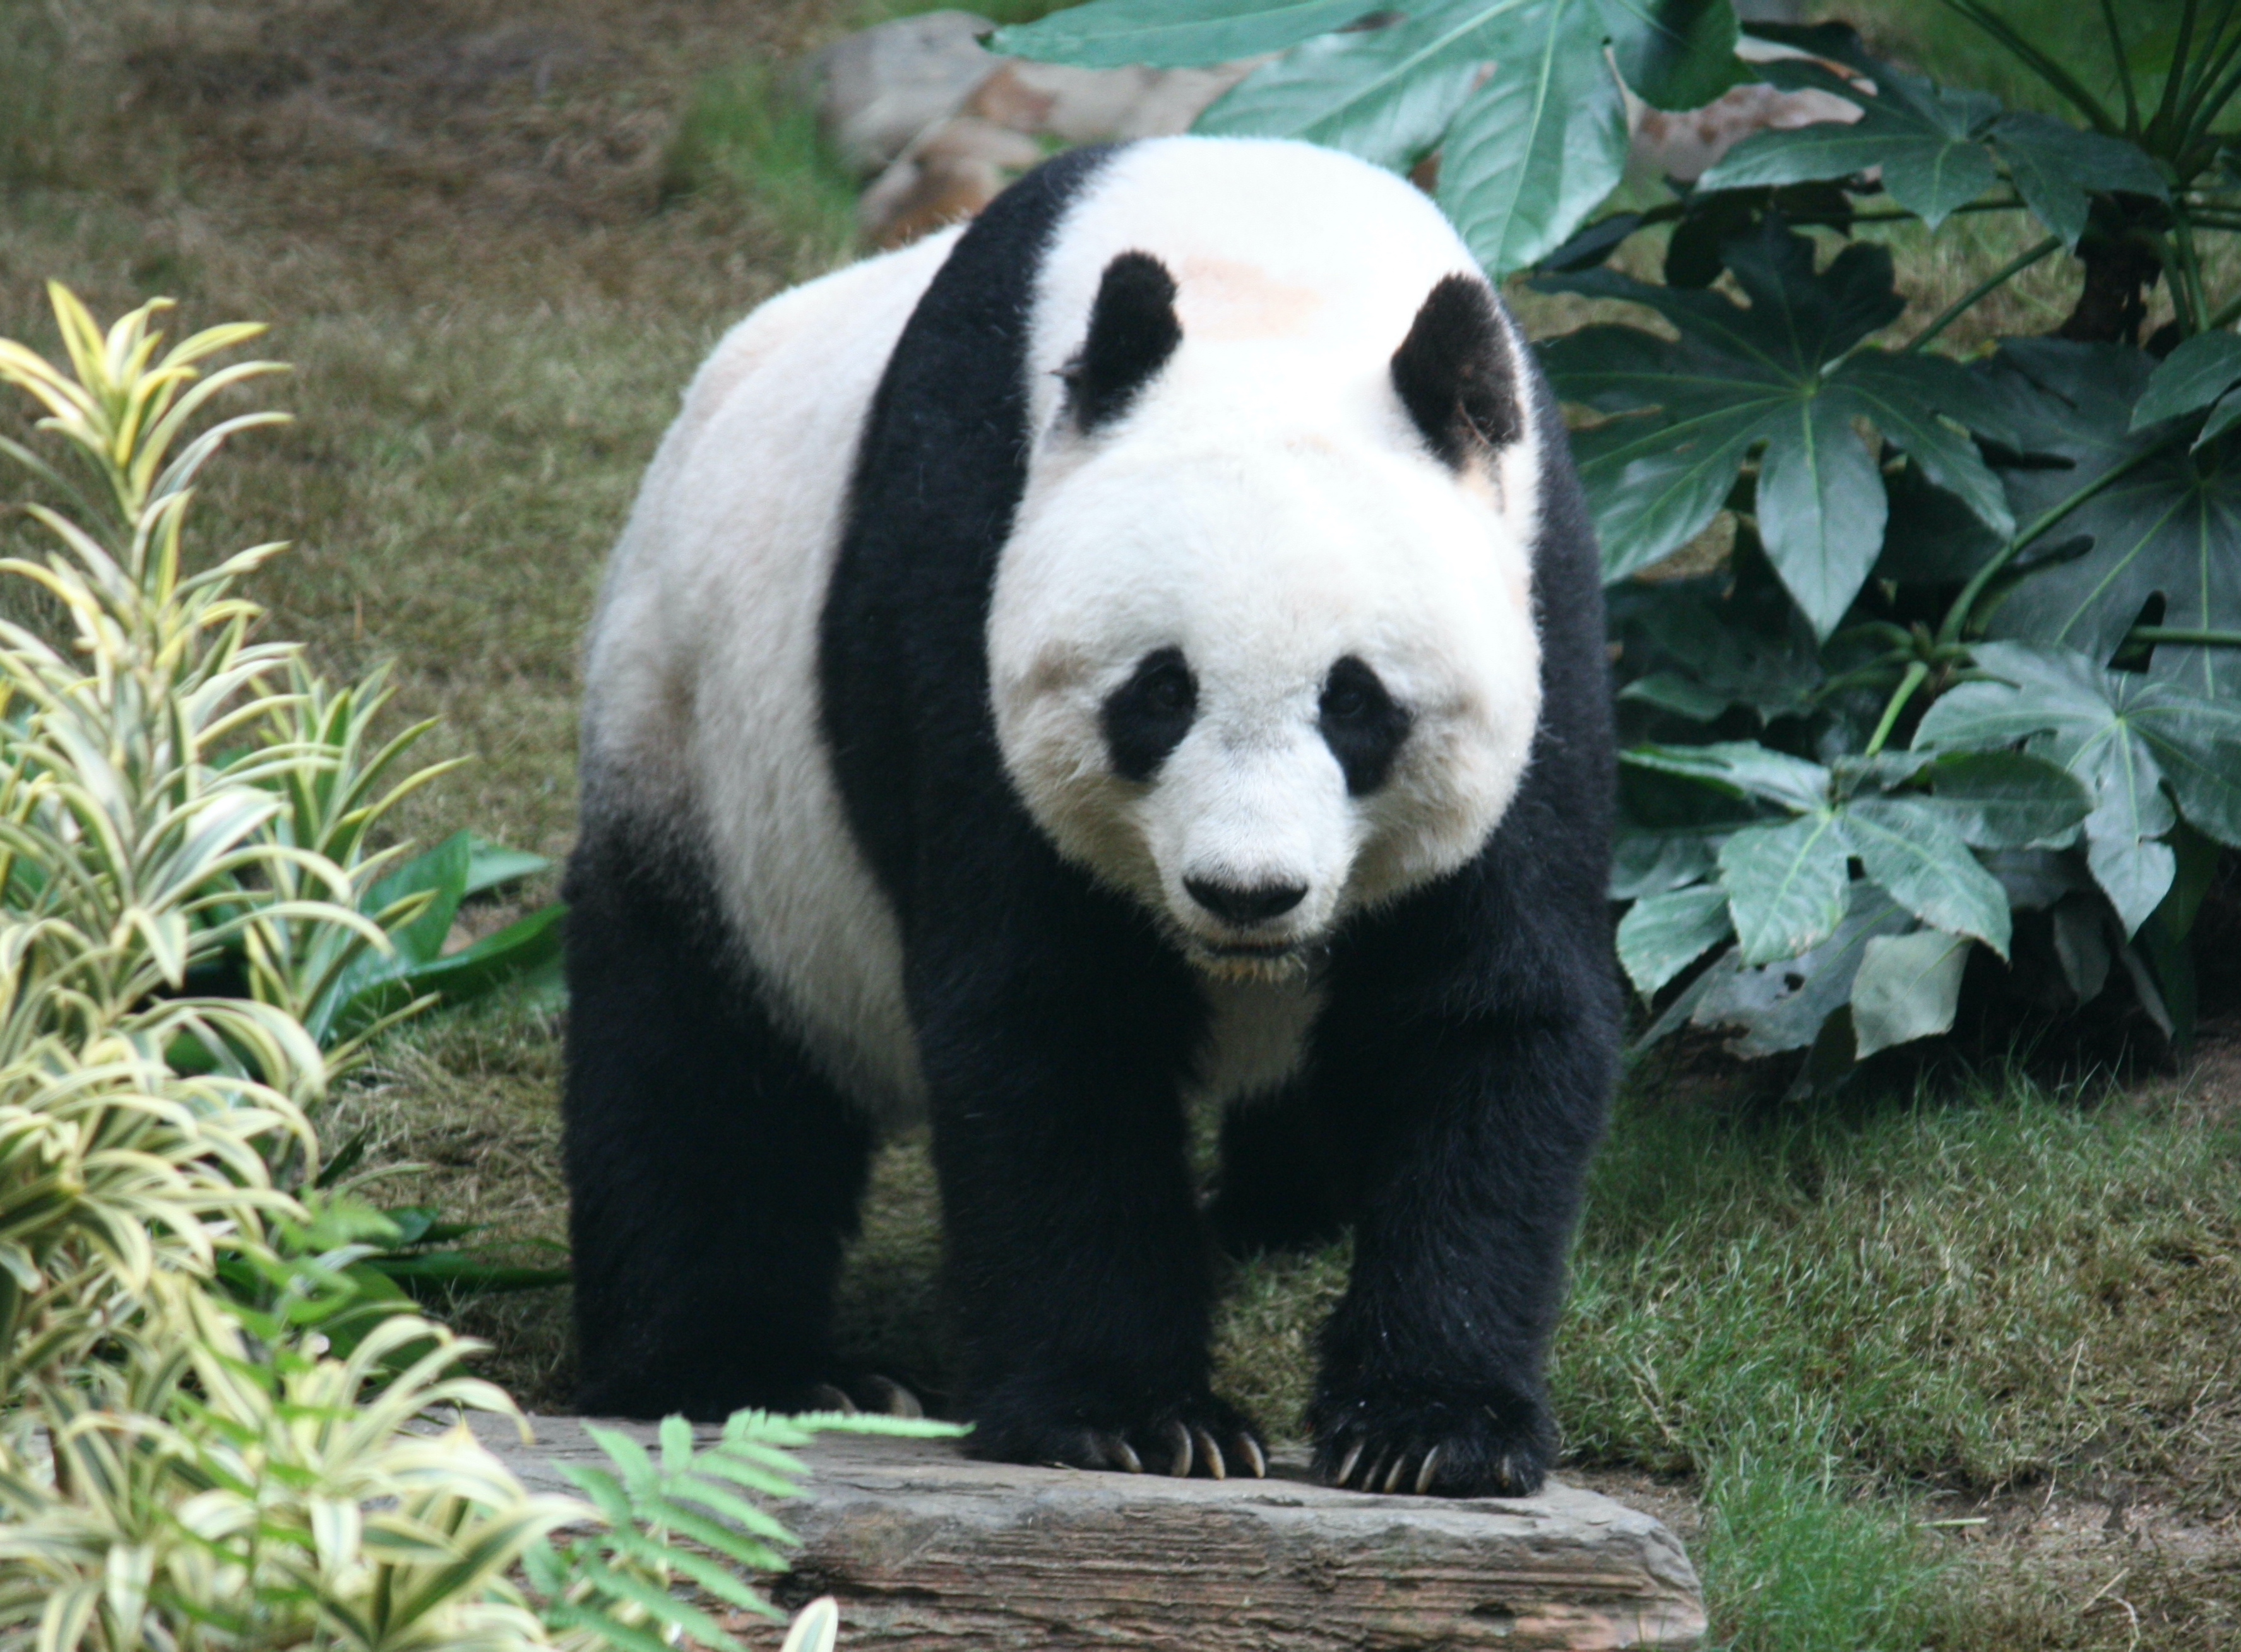 What is the name of the giant panda in the US?